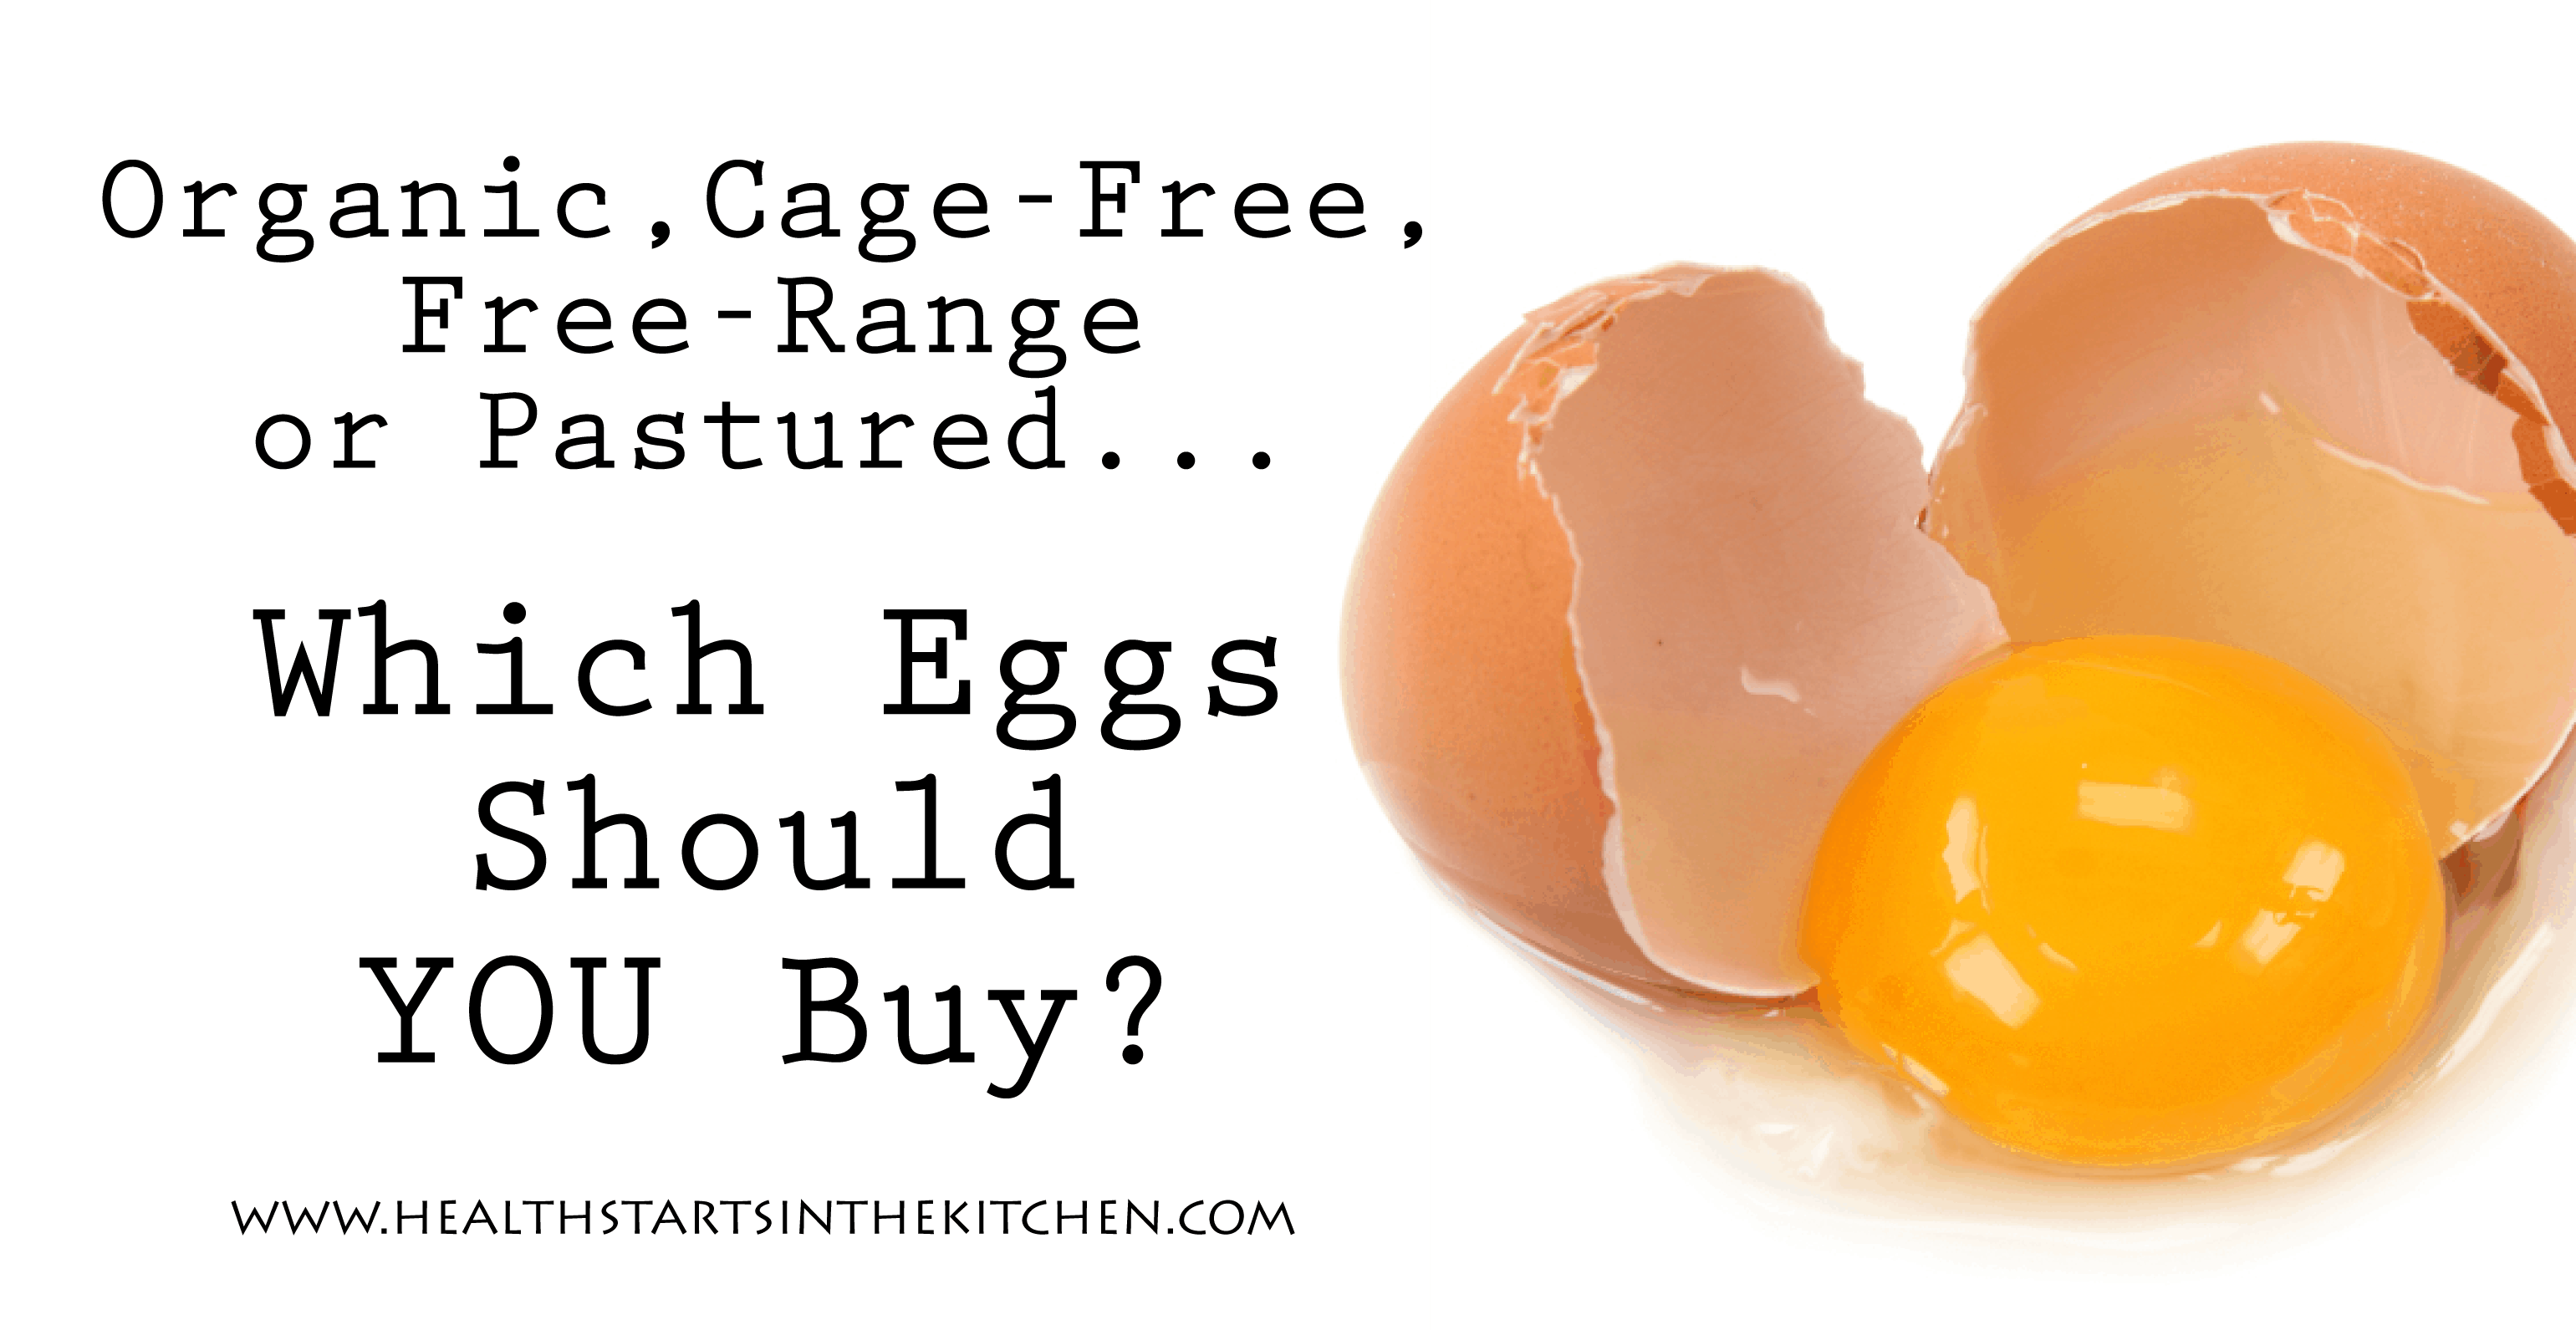 Organic, Cage-Free, Free-Range or Pastured… Sorting Through the Confusion on Egg Labels